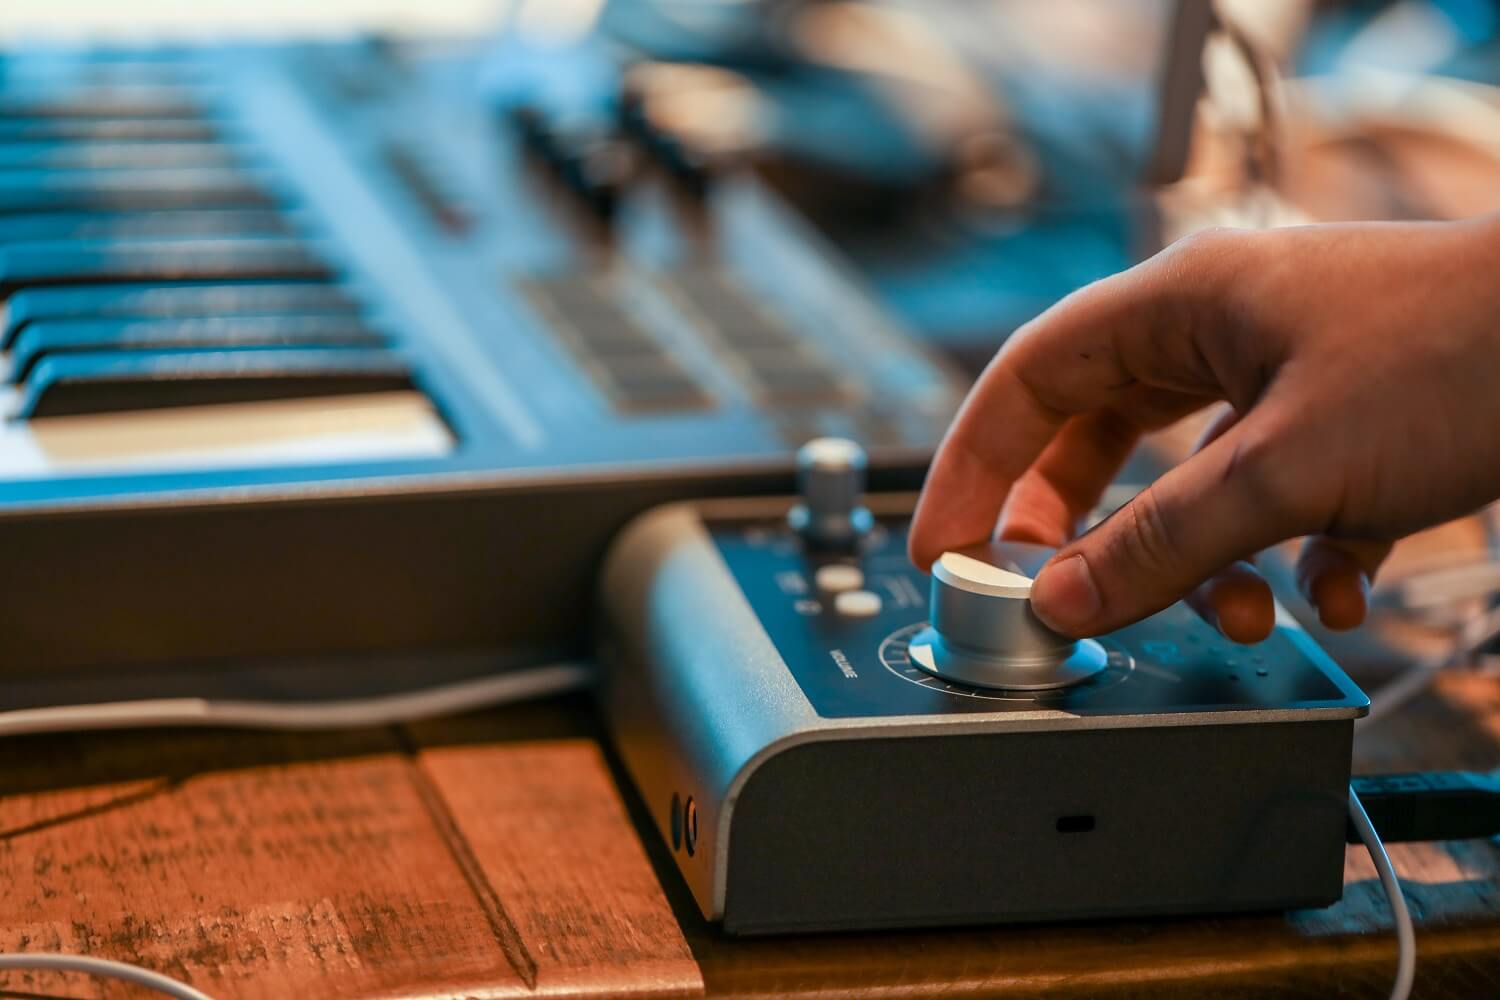 Audient iD4 audio interface with a hand on the iD knob and a keyboard blurred in the background